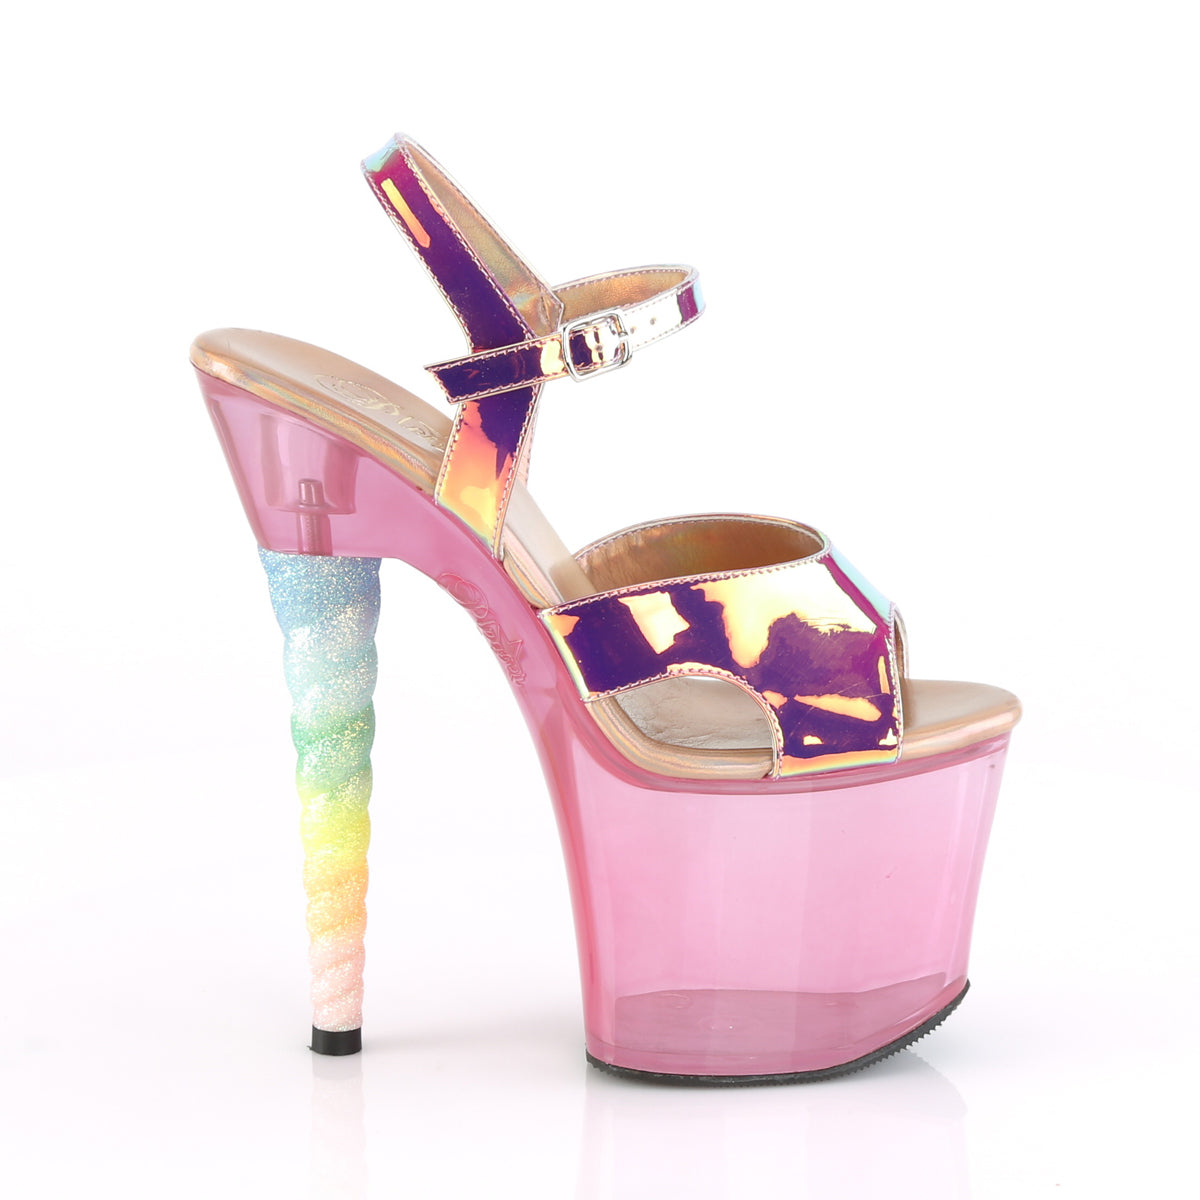 UNICORN-711T 7 Inch Heel Pink Bubble Gum Pink Tint Sexy Shoe-Pleaser- Sexy Shoes Fetish Heels